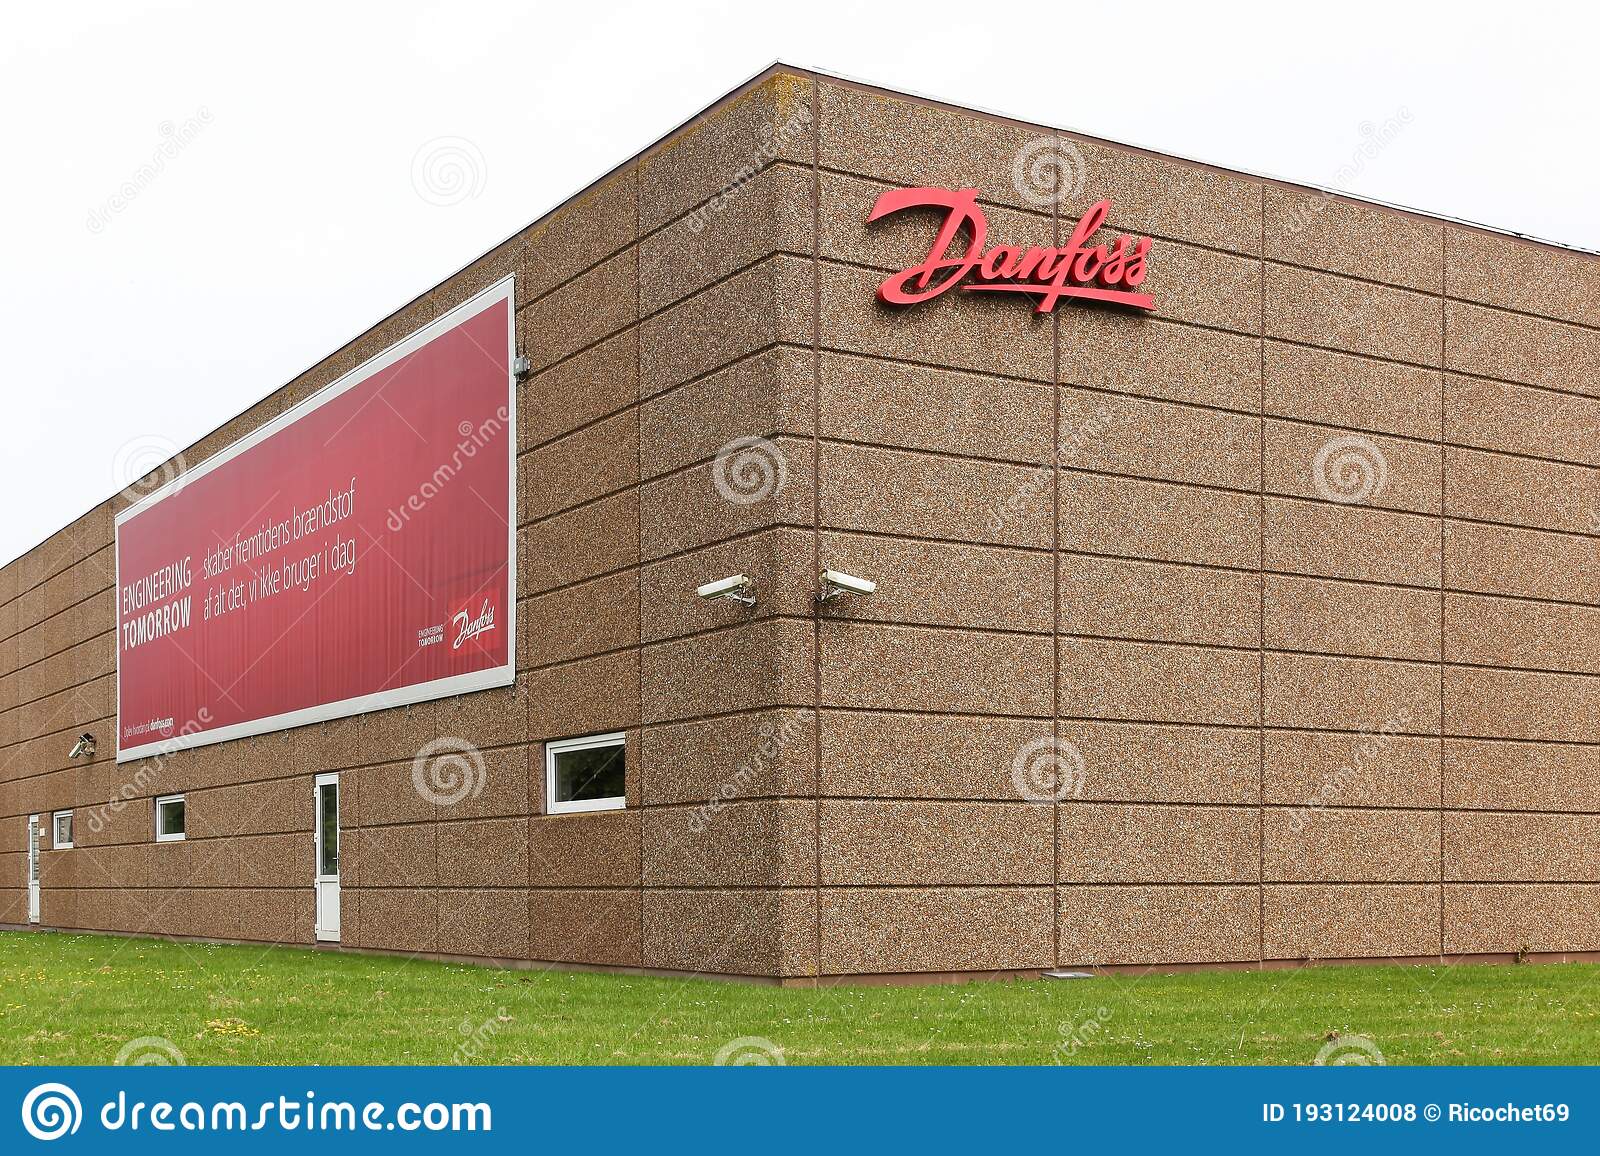 Danfoss India launches six new products at RefCold India 2019